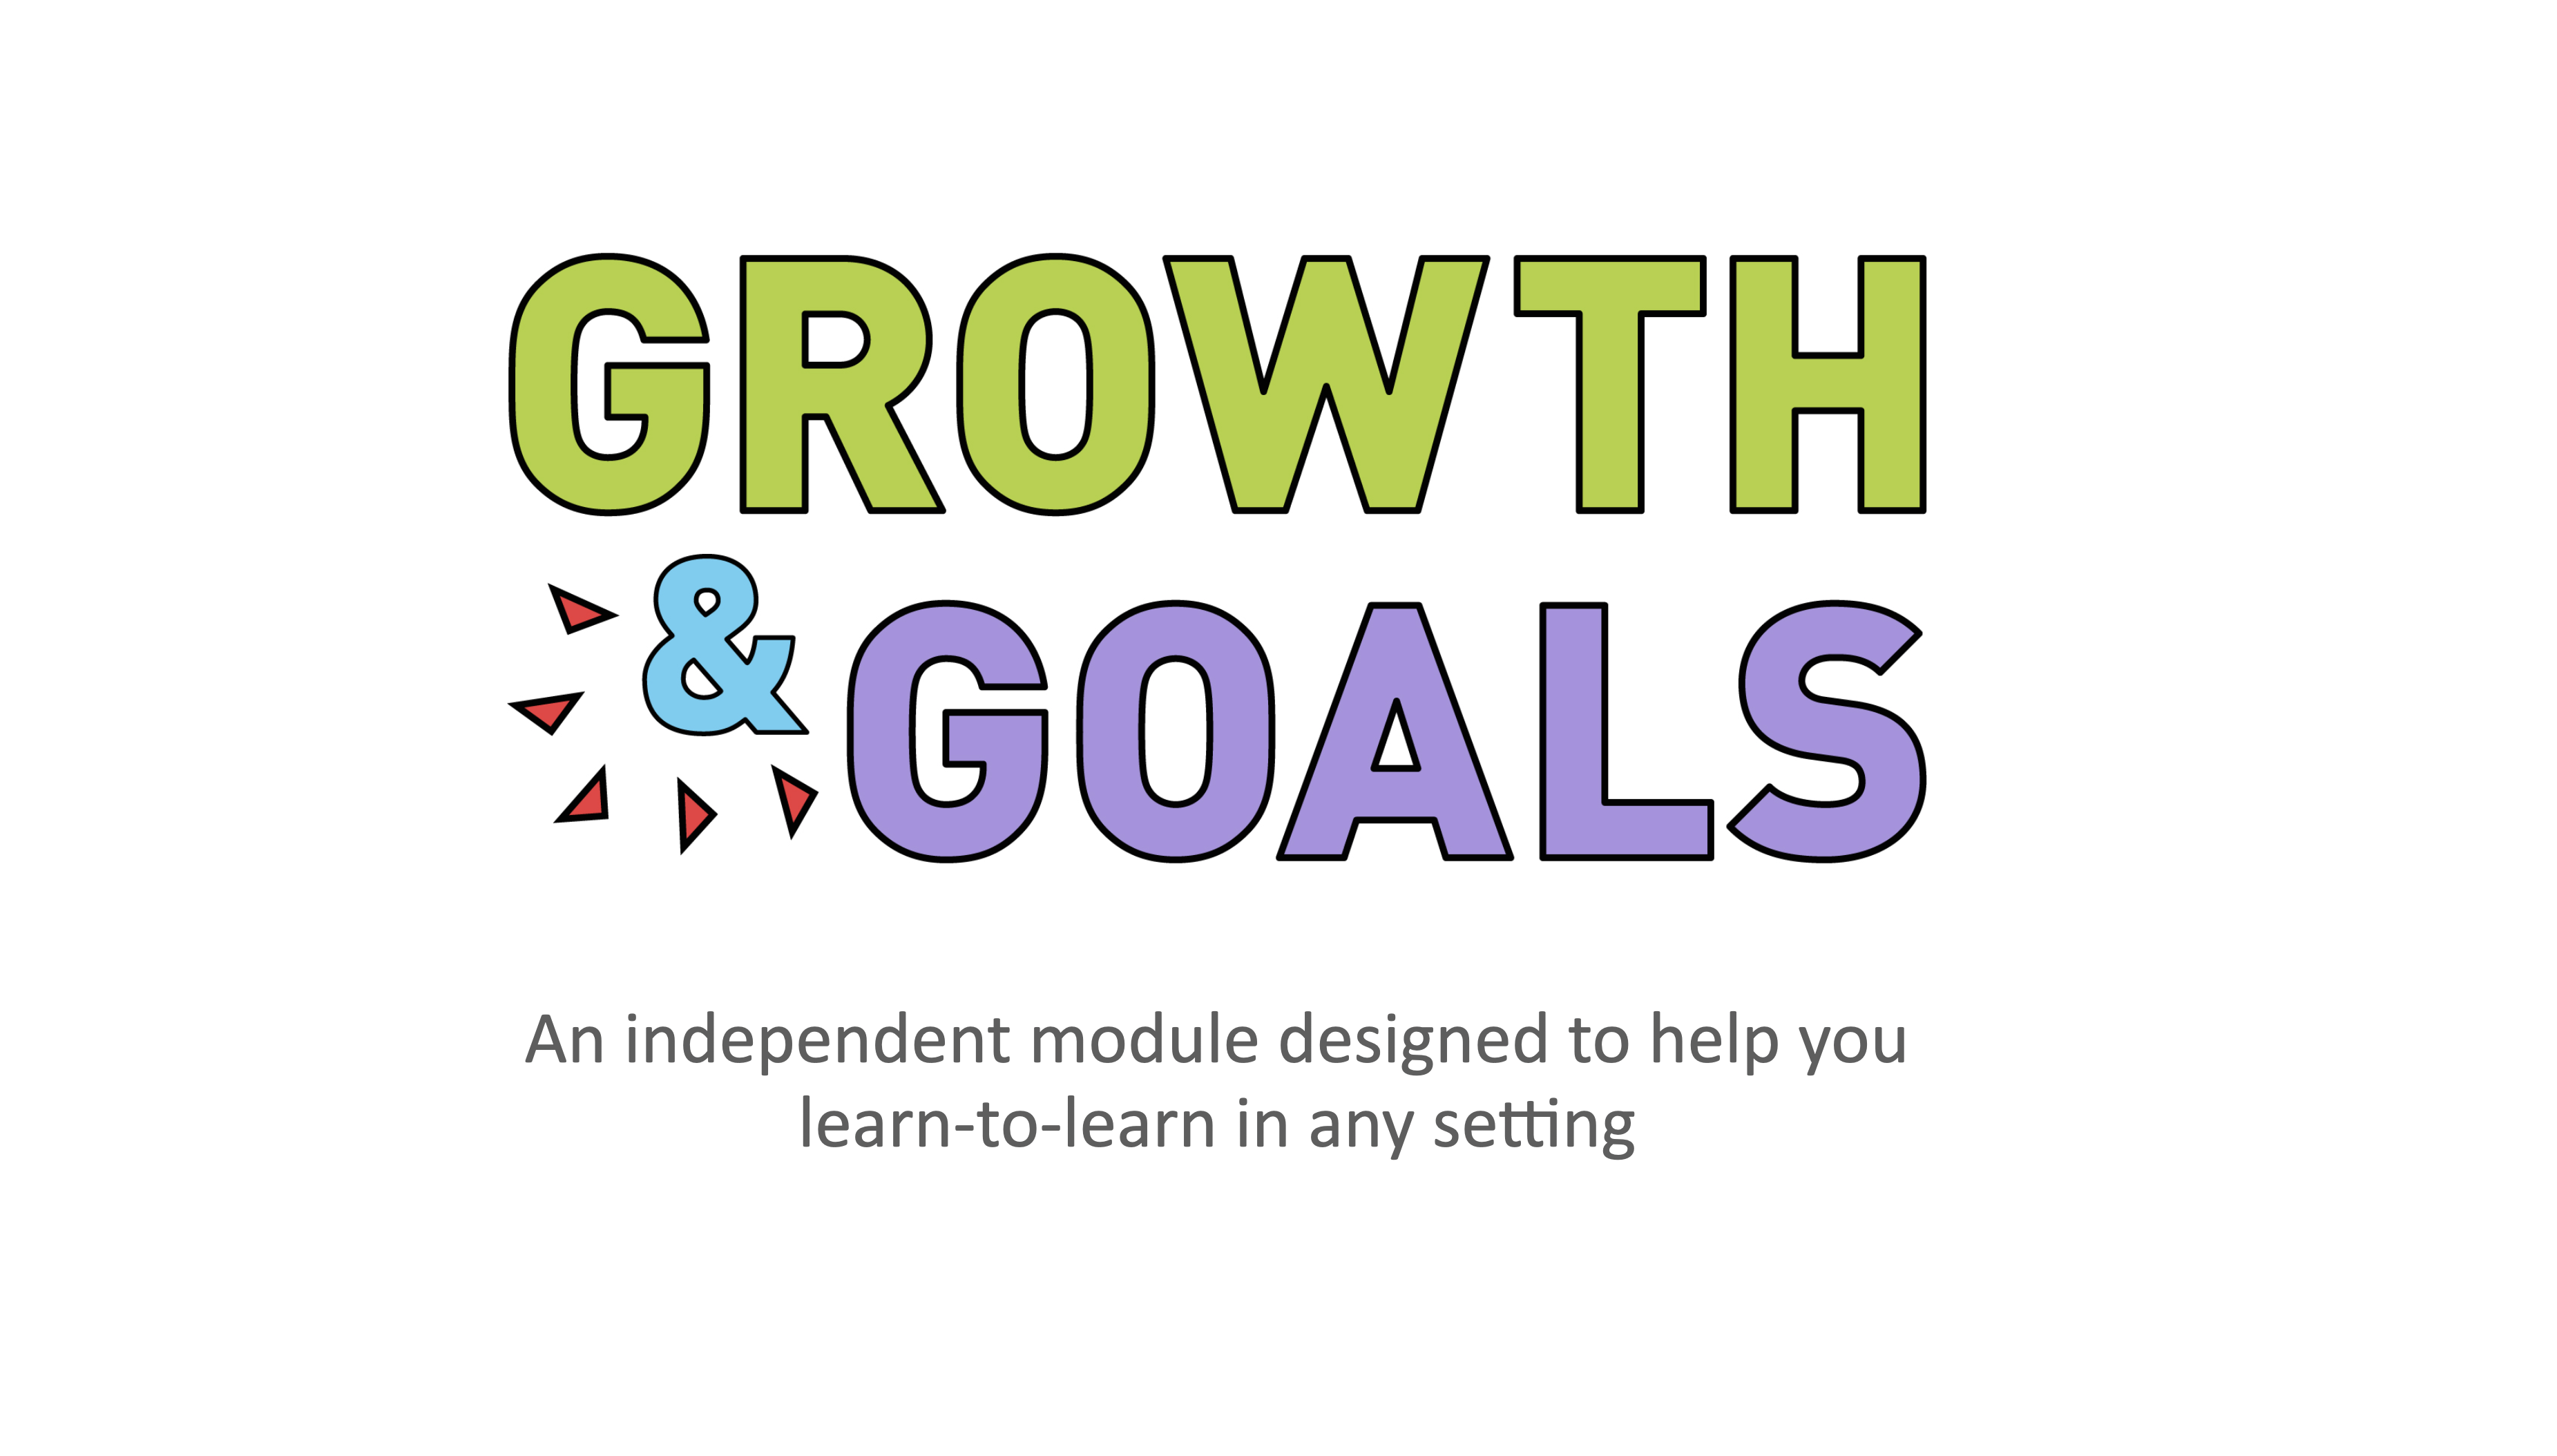 Cover image for Growth & Goals: a module for any context, designed to develop learning skills